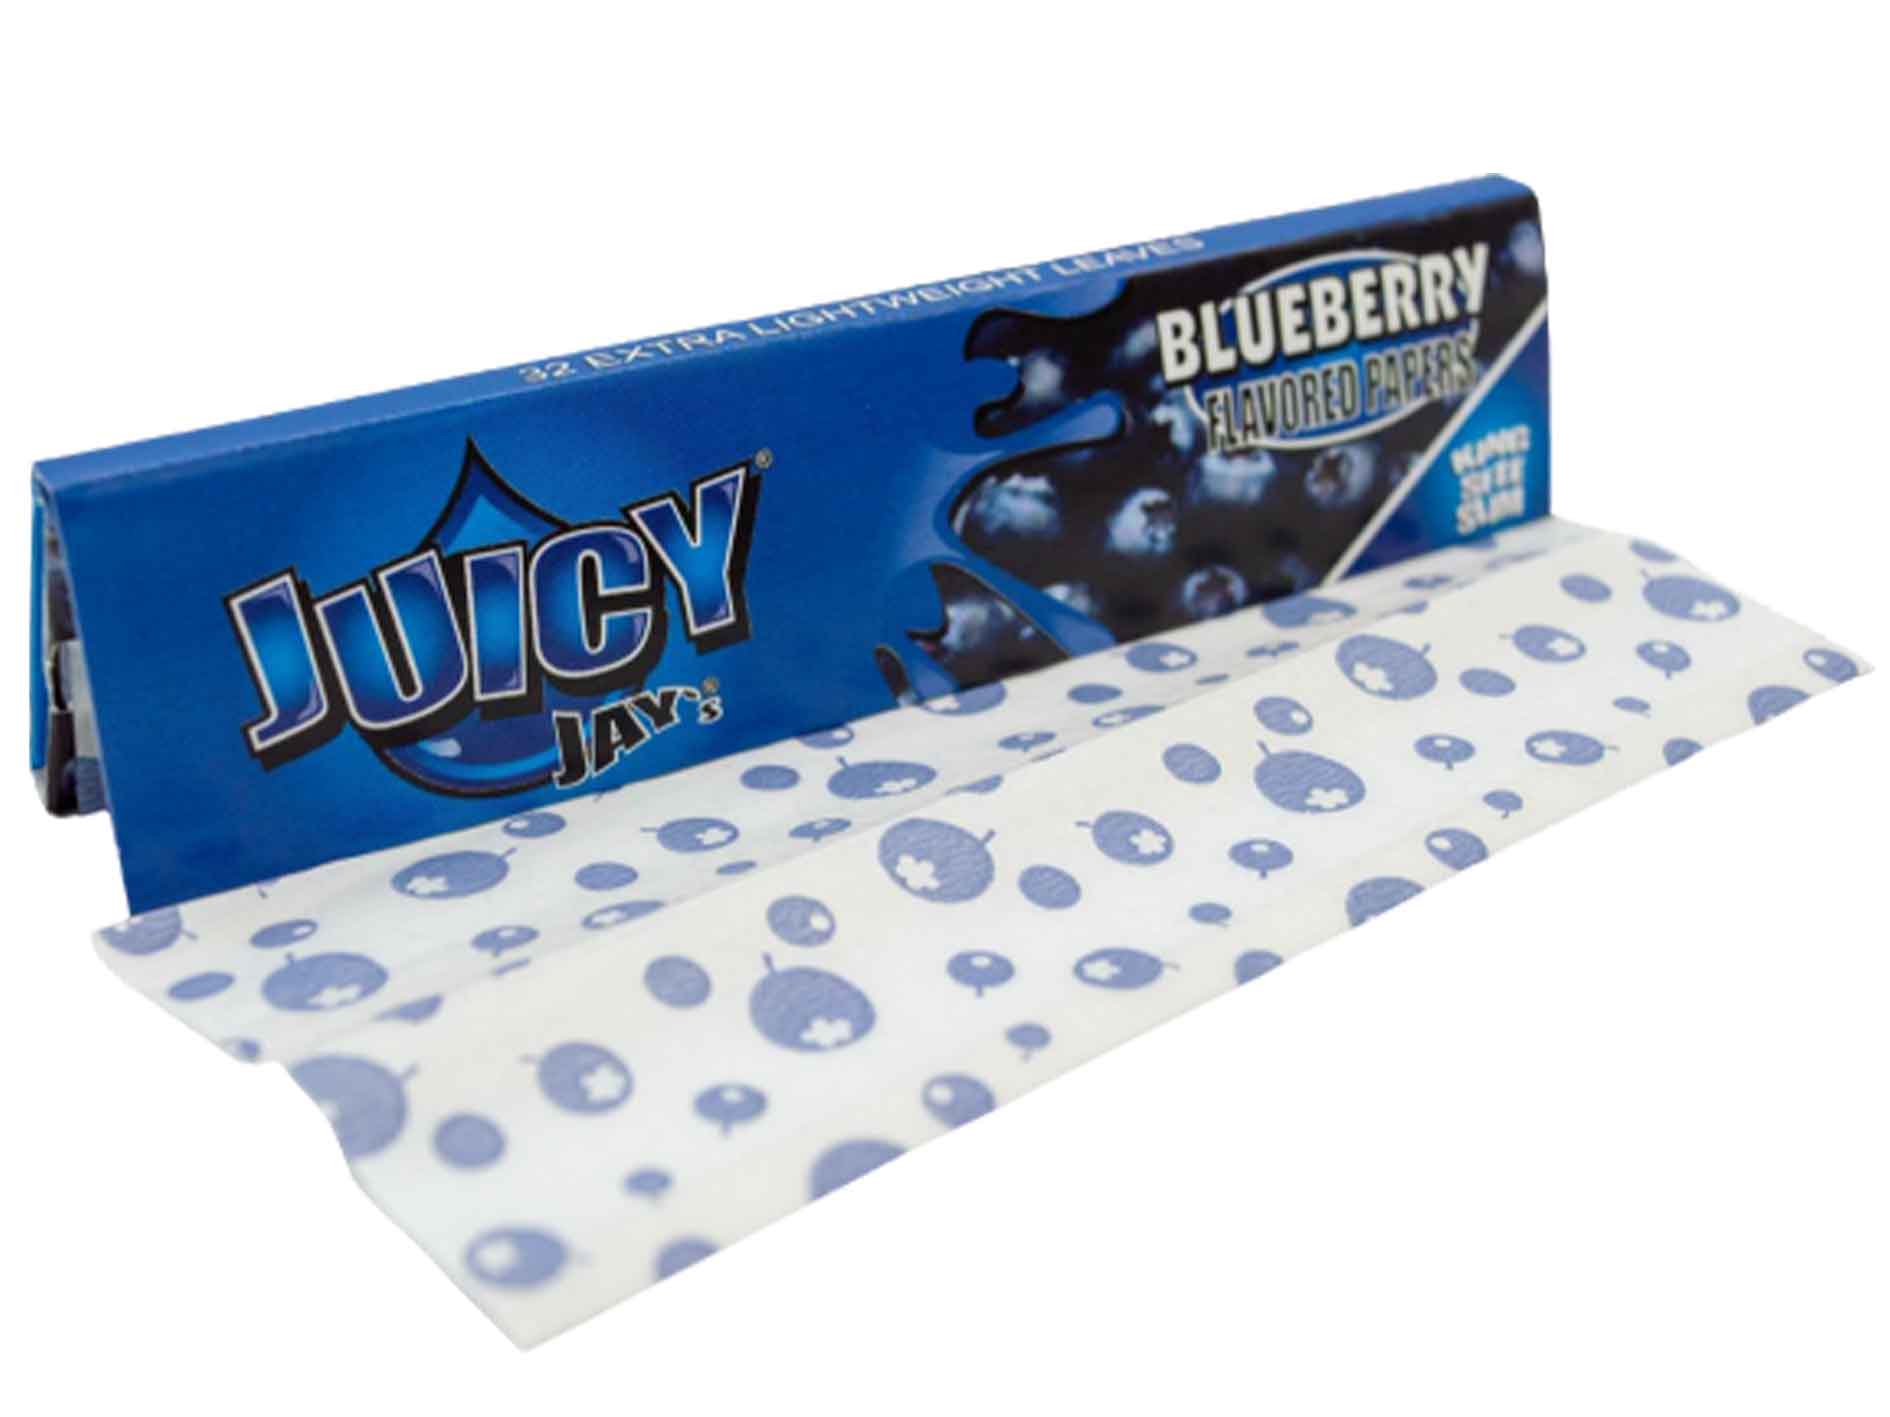 JUICY JAY´S Flavored Papers - Blueberry